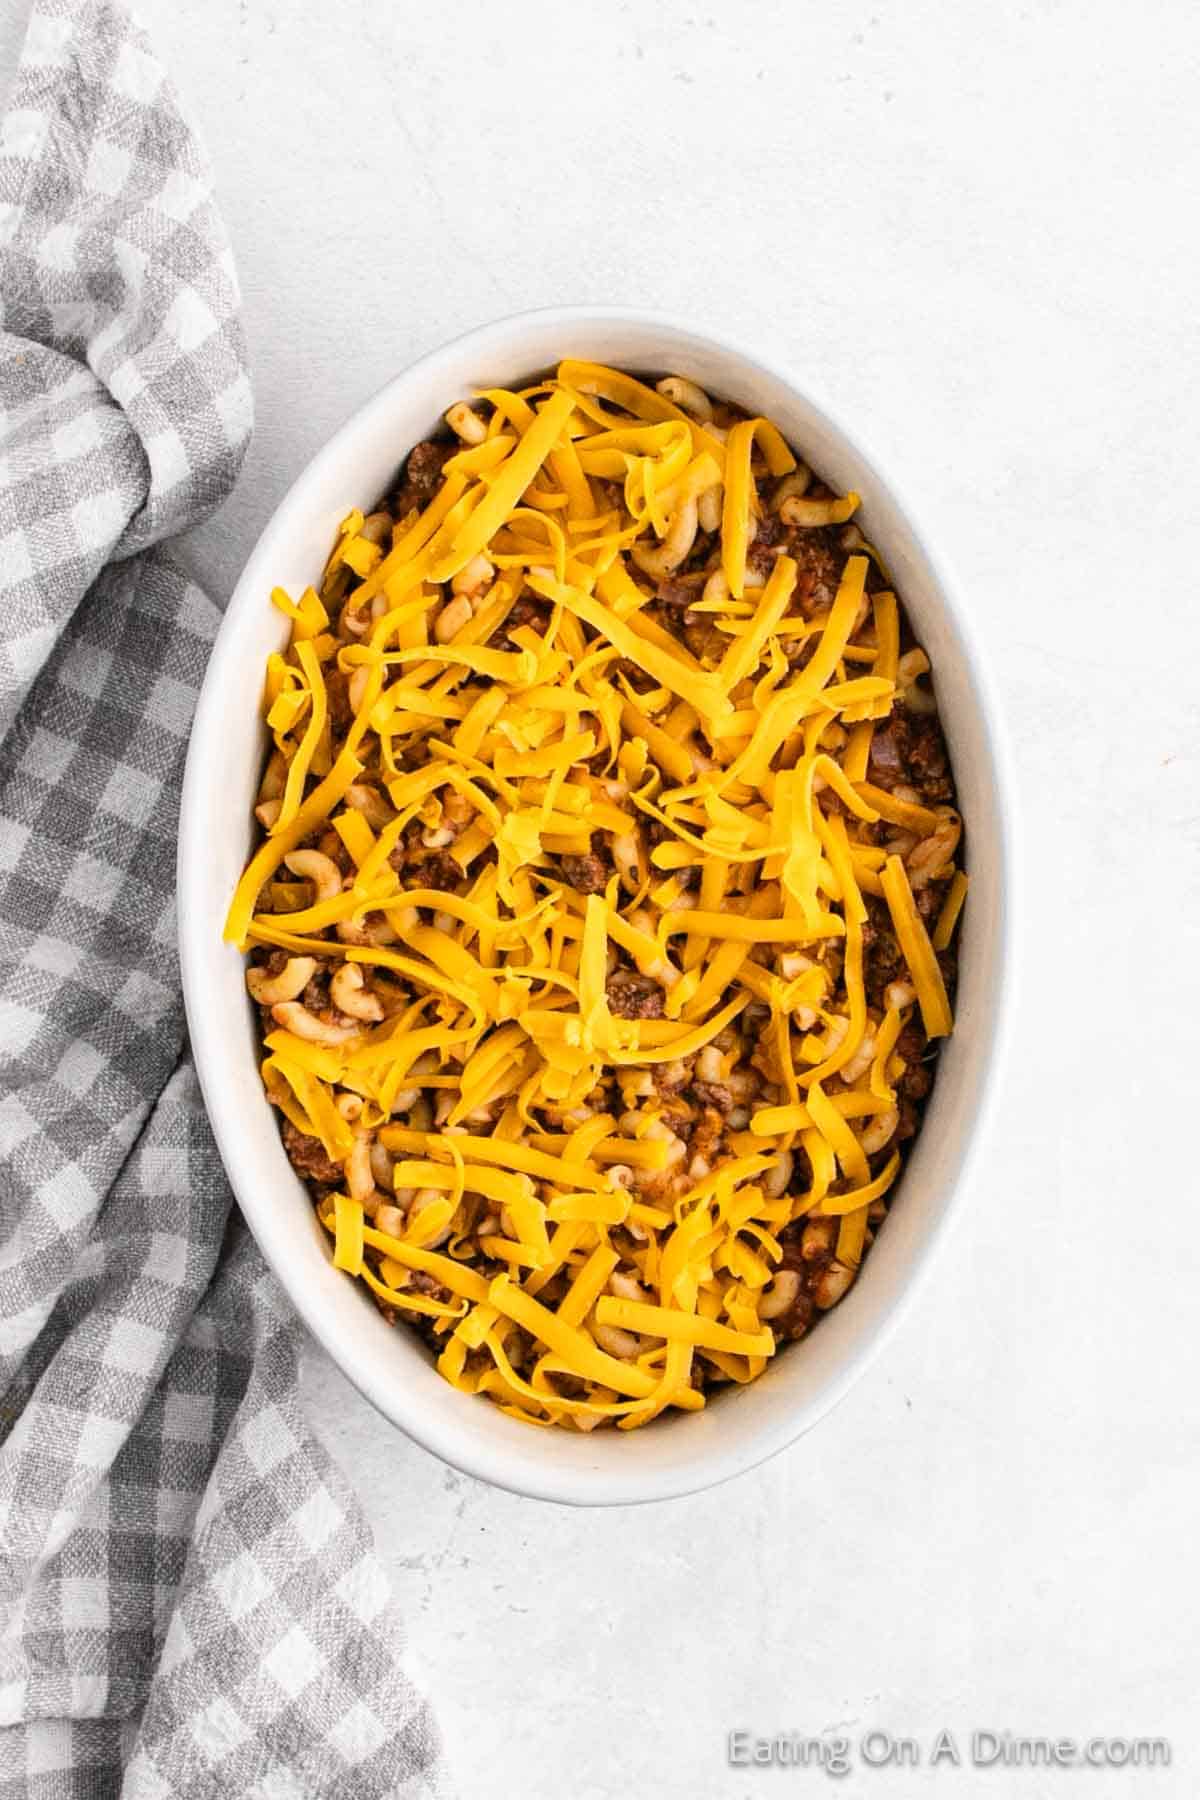 Pouring the meat mixture in a casserole dish topped with shredded cheese